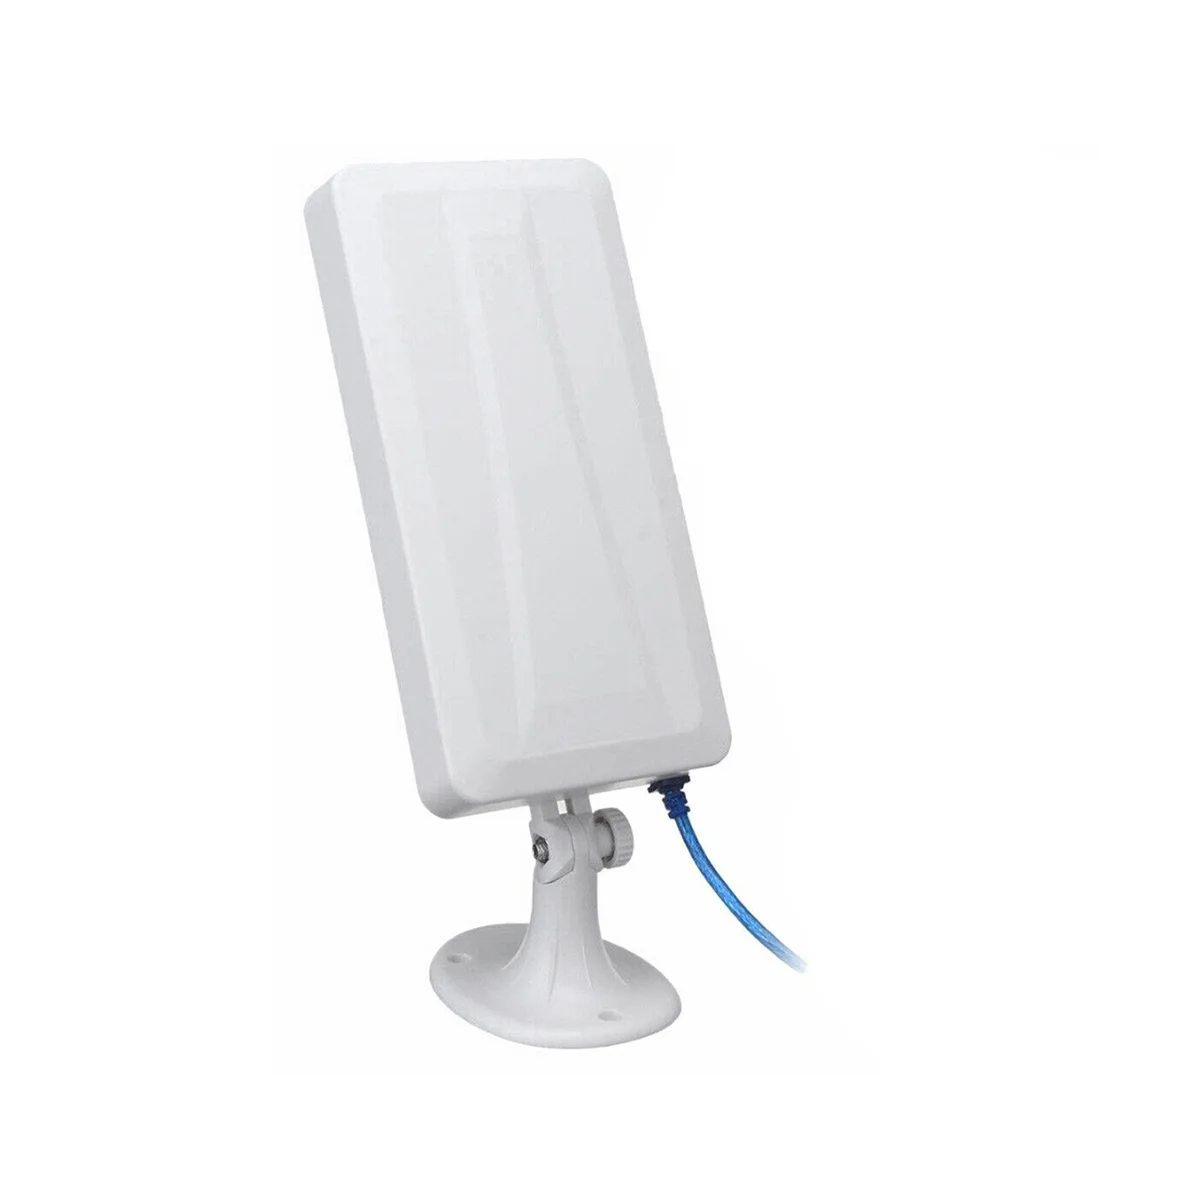 

Long Range 150Mbps WiFi Extender Wireless Outdoor Router Repeater WLAN Antenna for Booster 5M